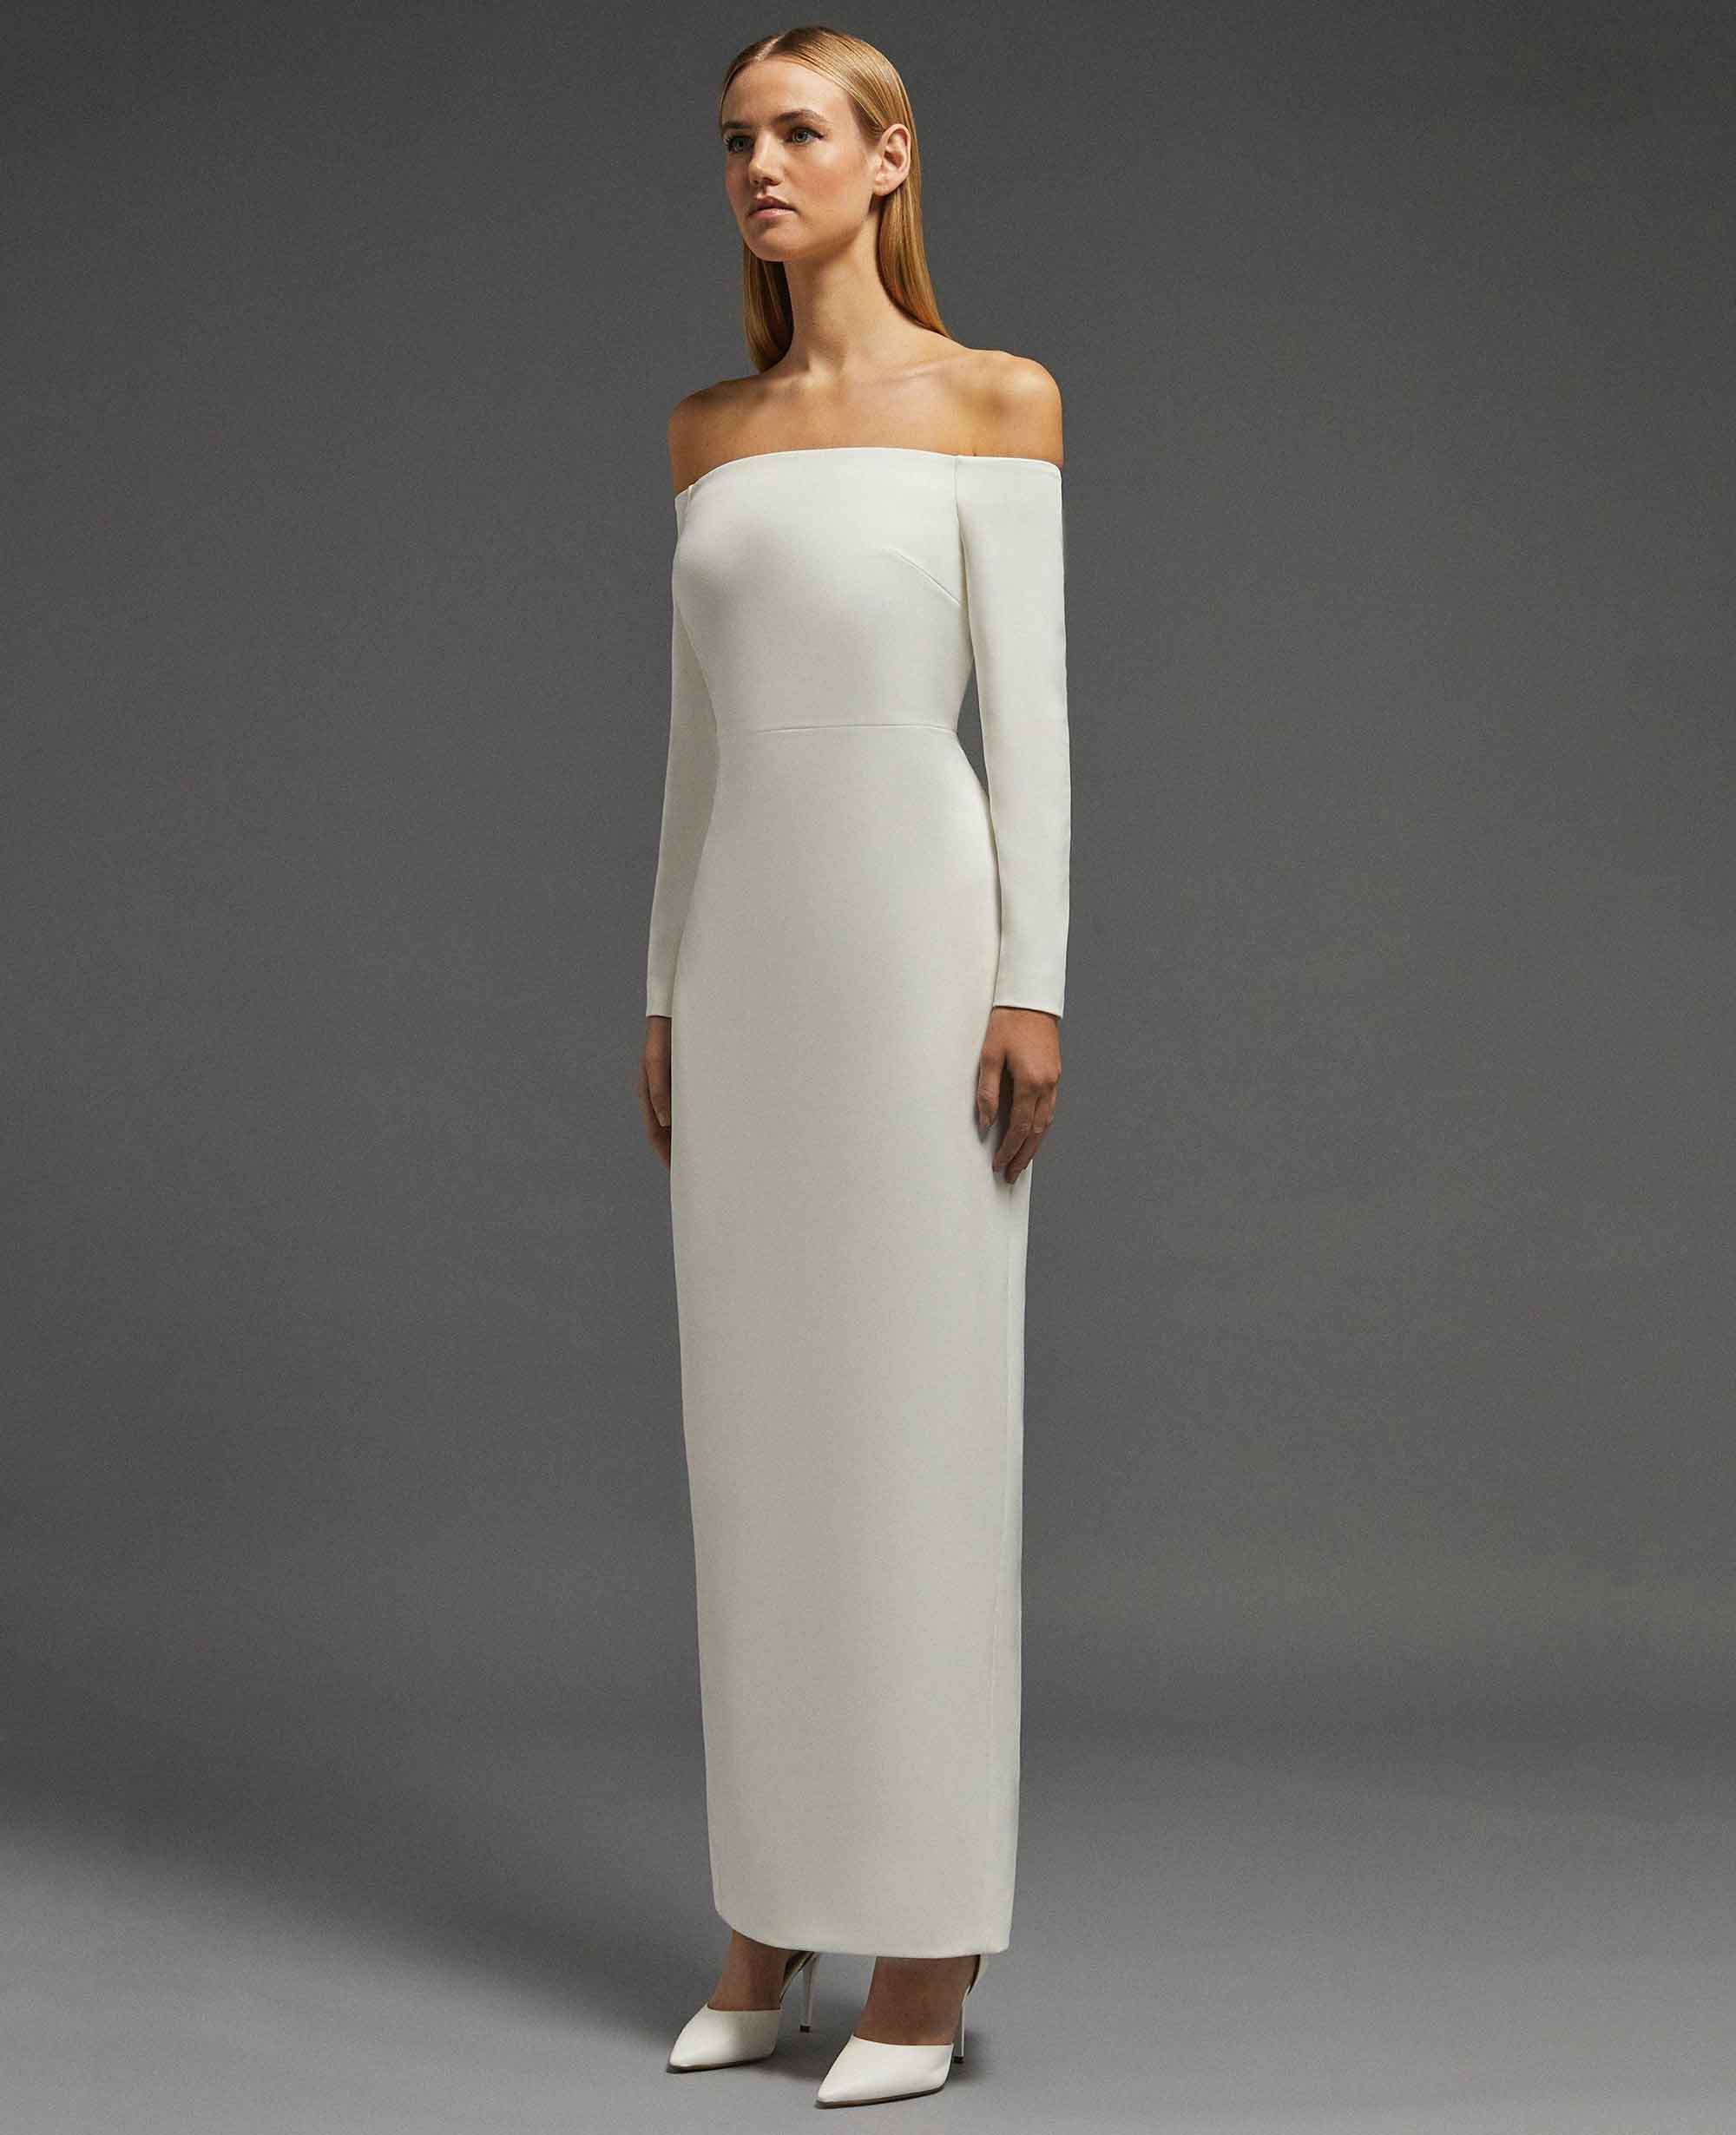 Designer Wedding Dress Dupes, From Westwood, Halfpenny And More